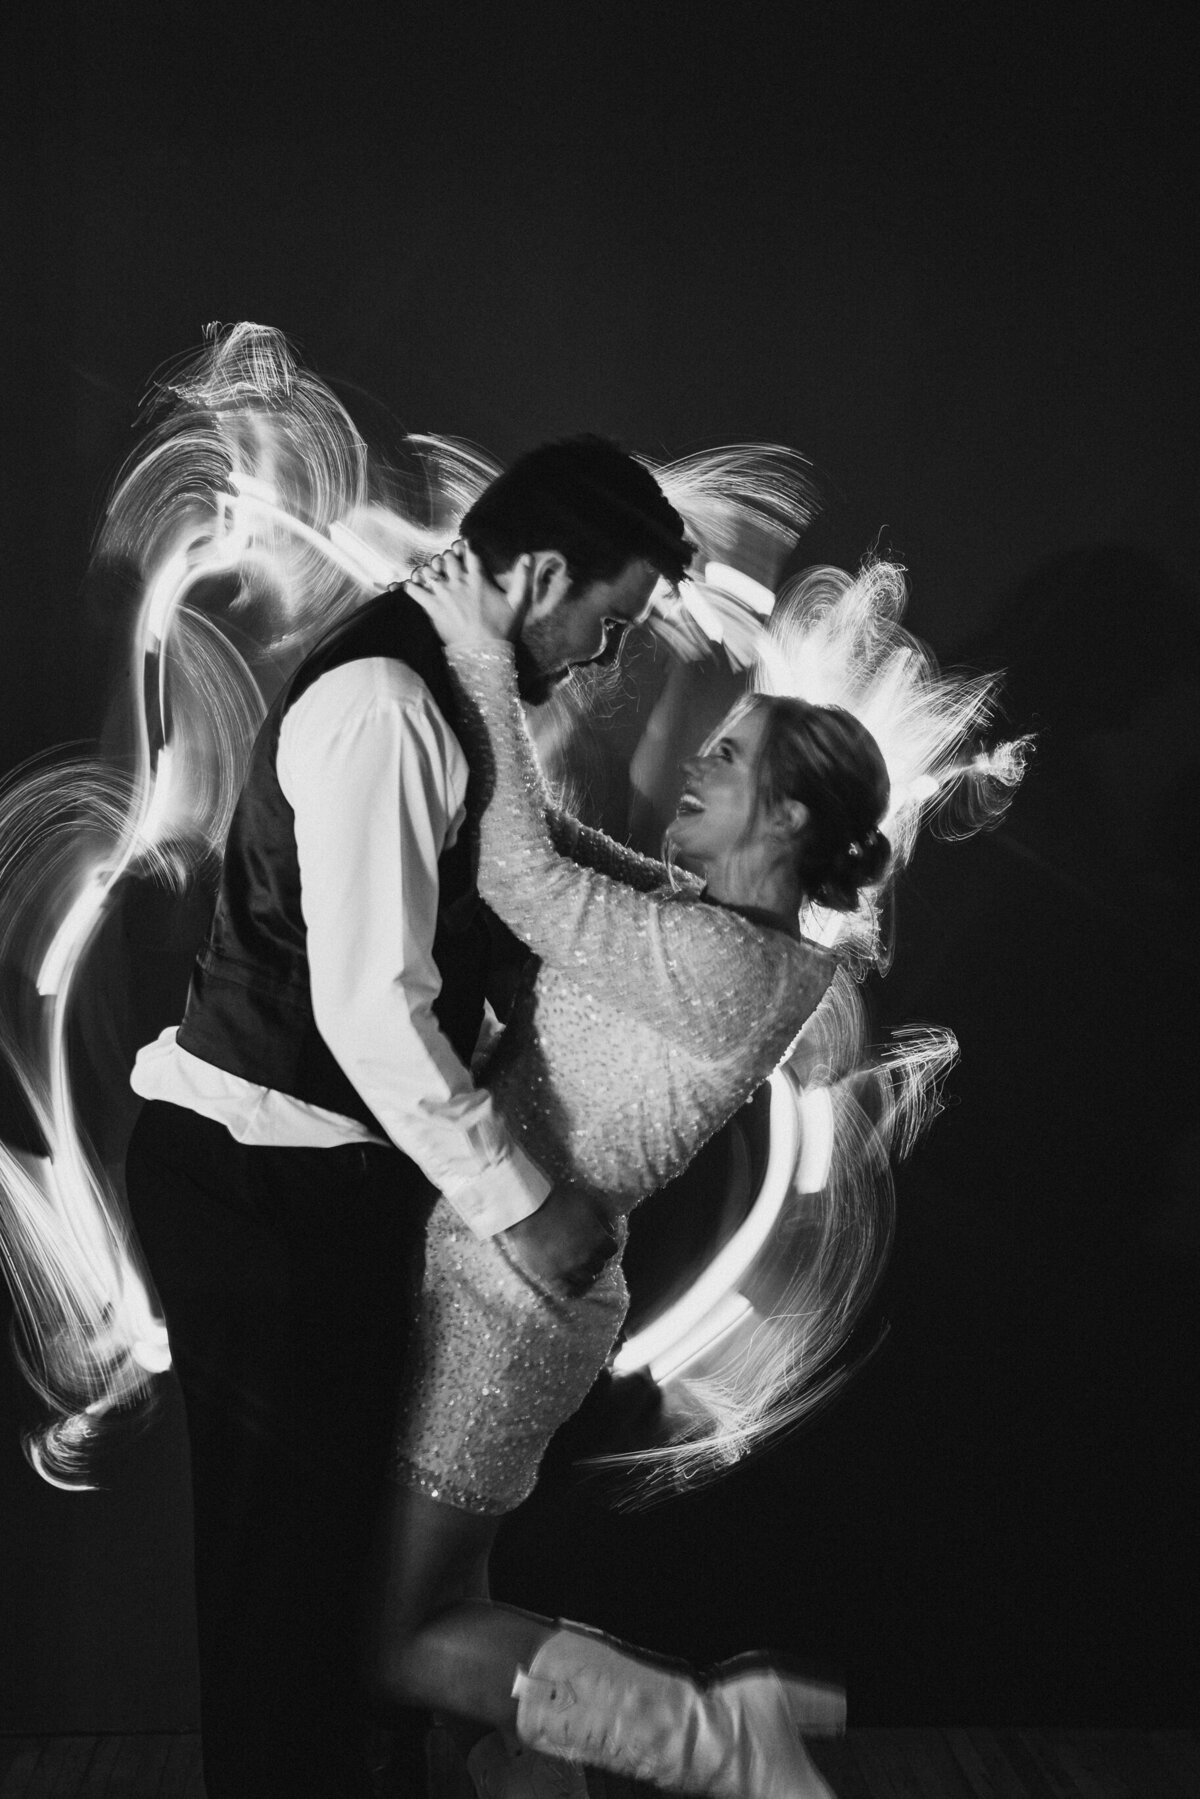 bride and groom in their after party outfits with light painting behind them for a creative long exposure portrait